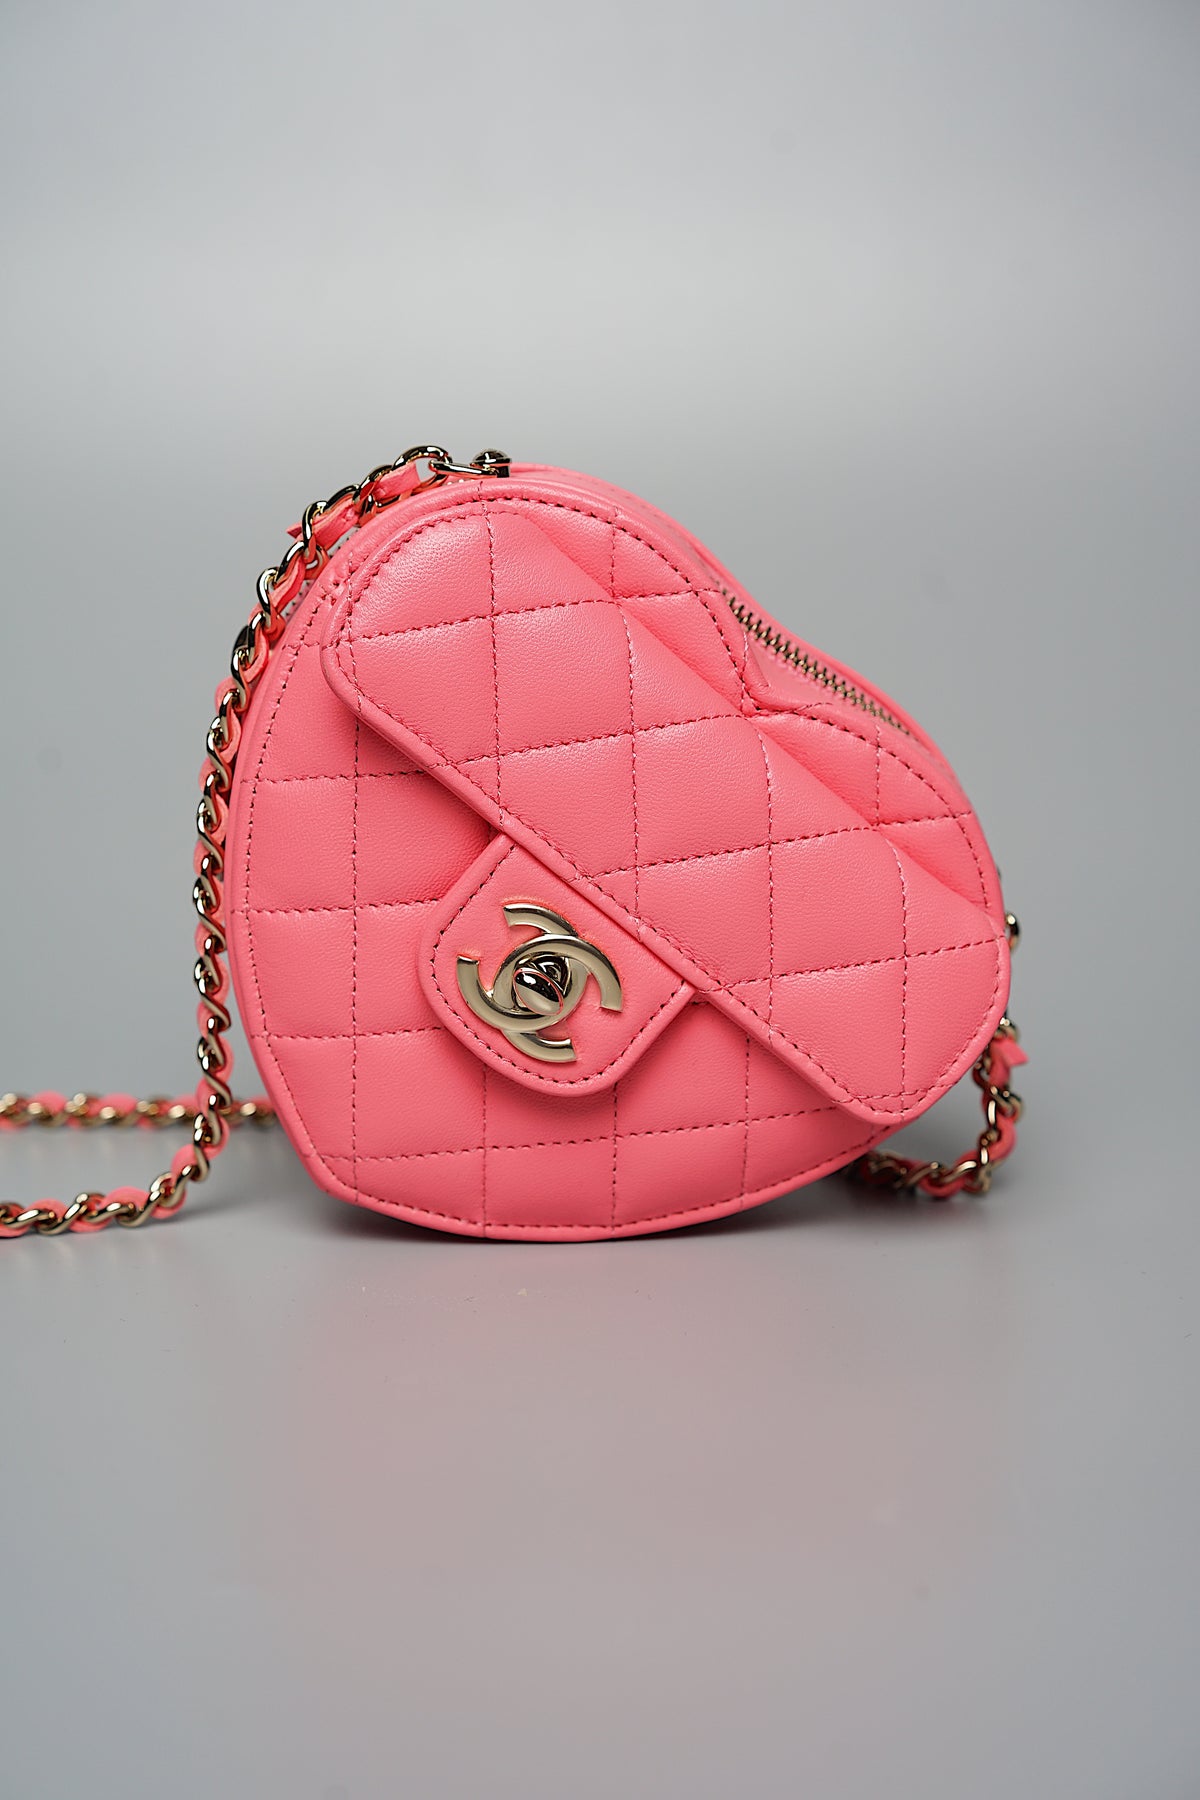 Chanel Small Heart Bag - Like New - The Consignment Cafe